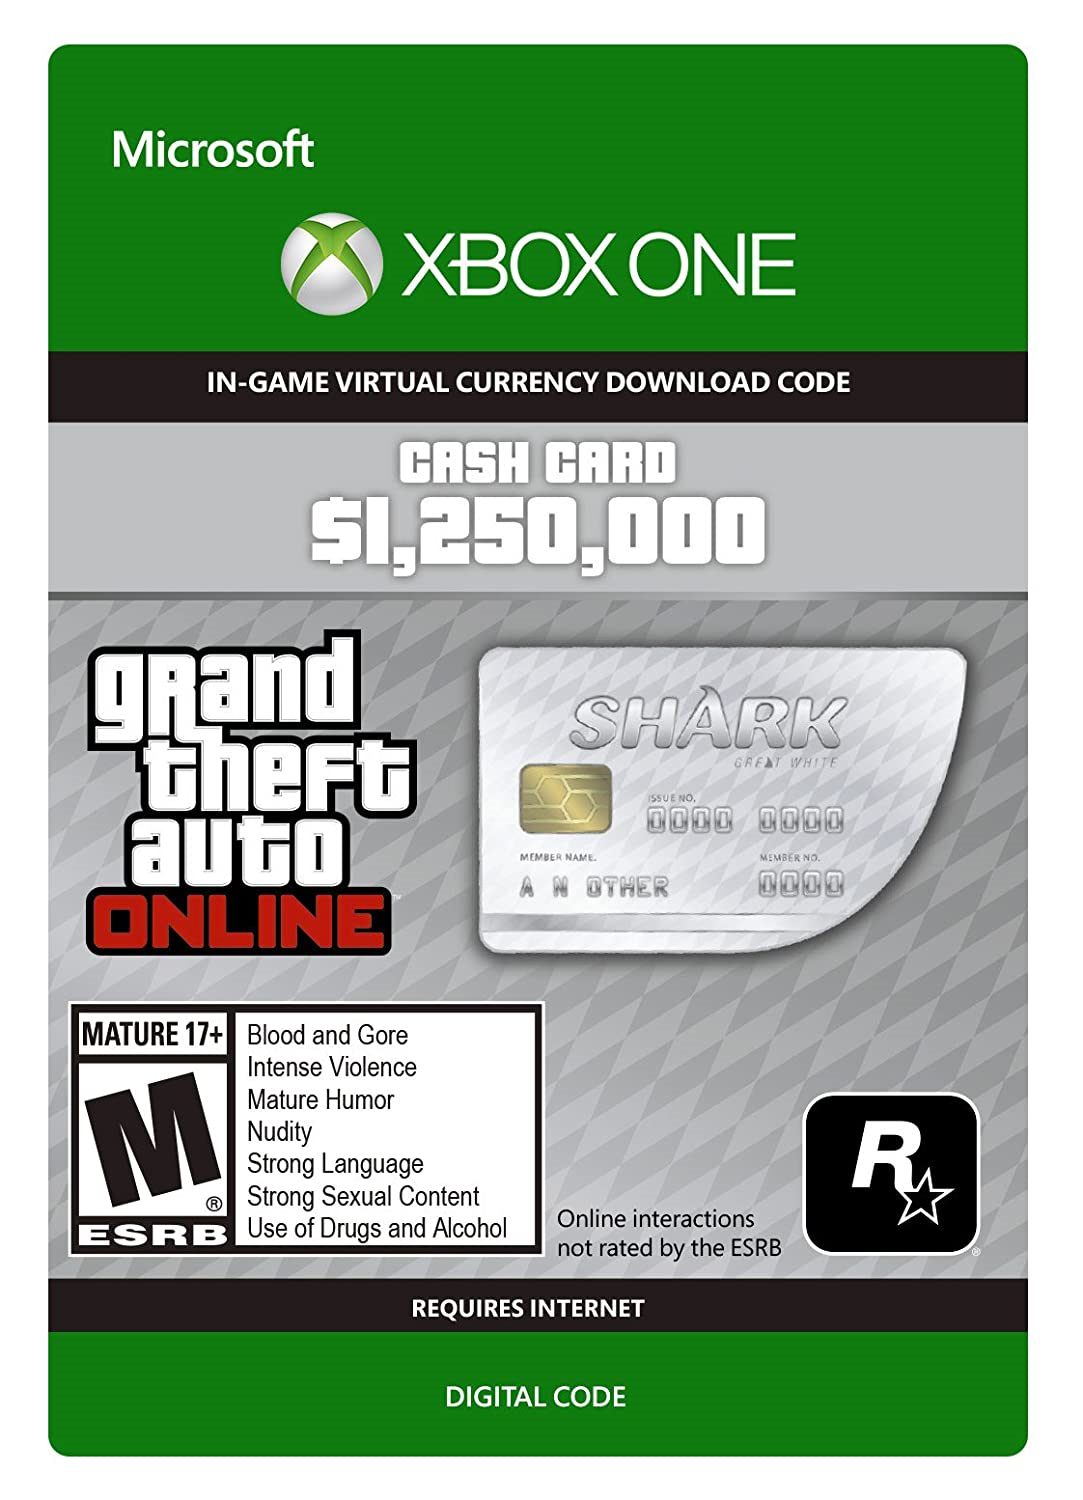 Grand Theft Auto V : Great White Shark Cash Card $1,250,000 In-G